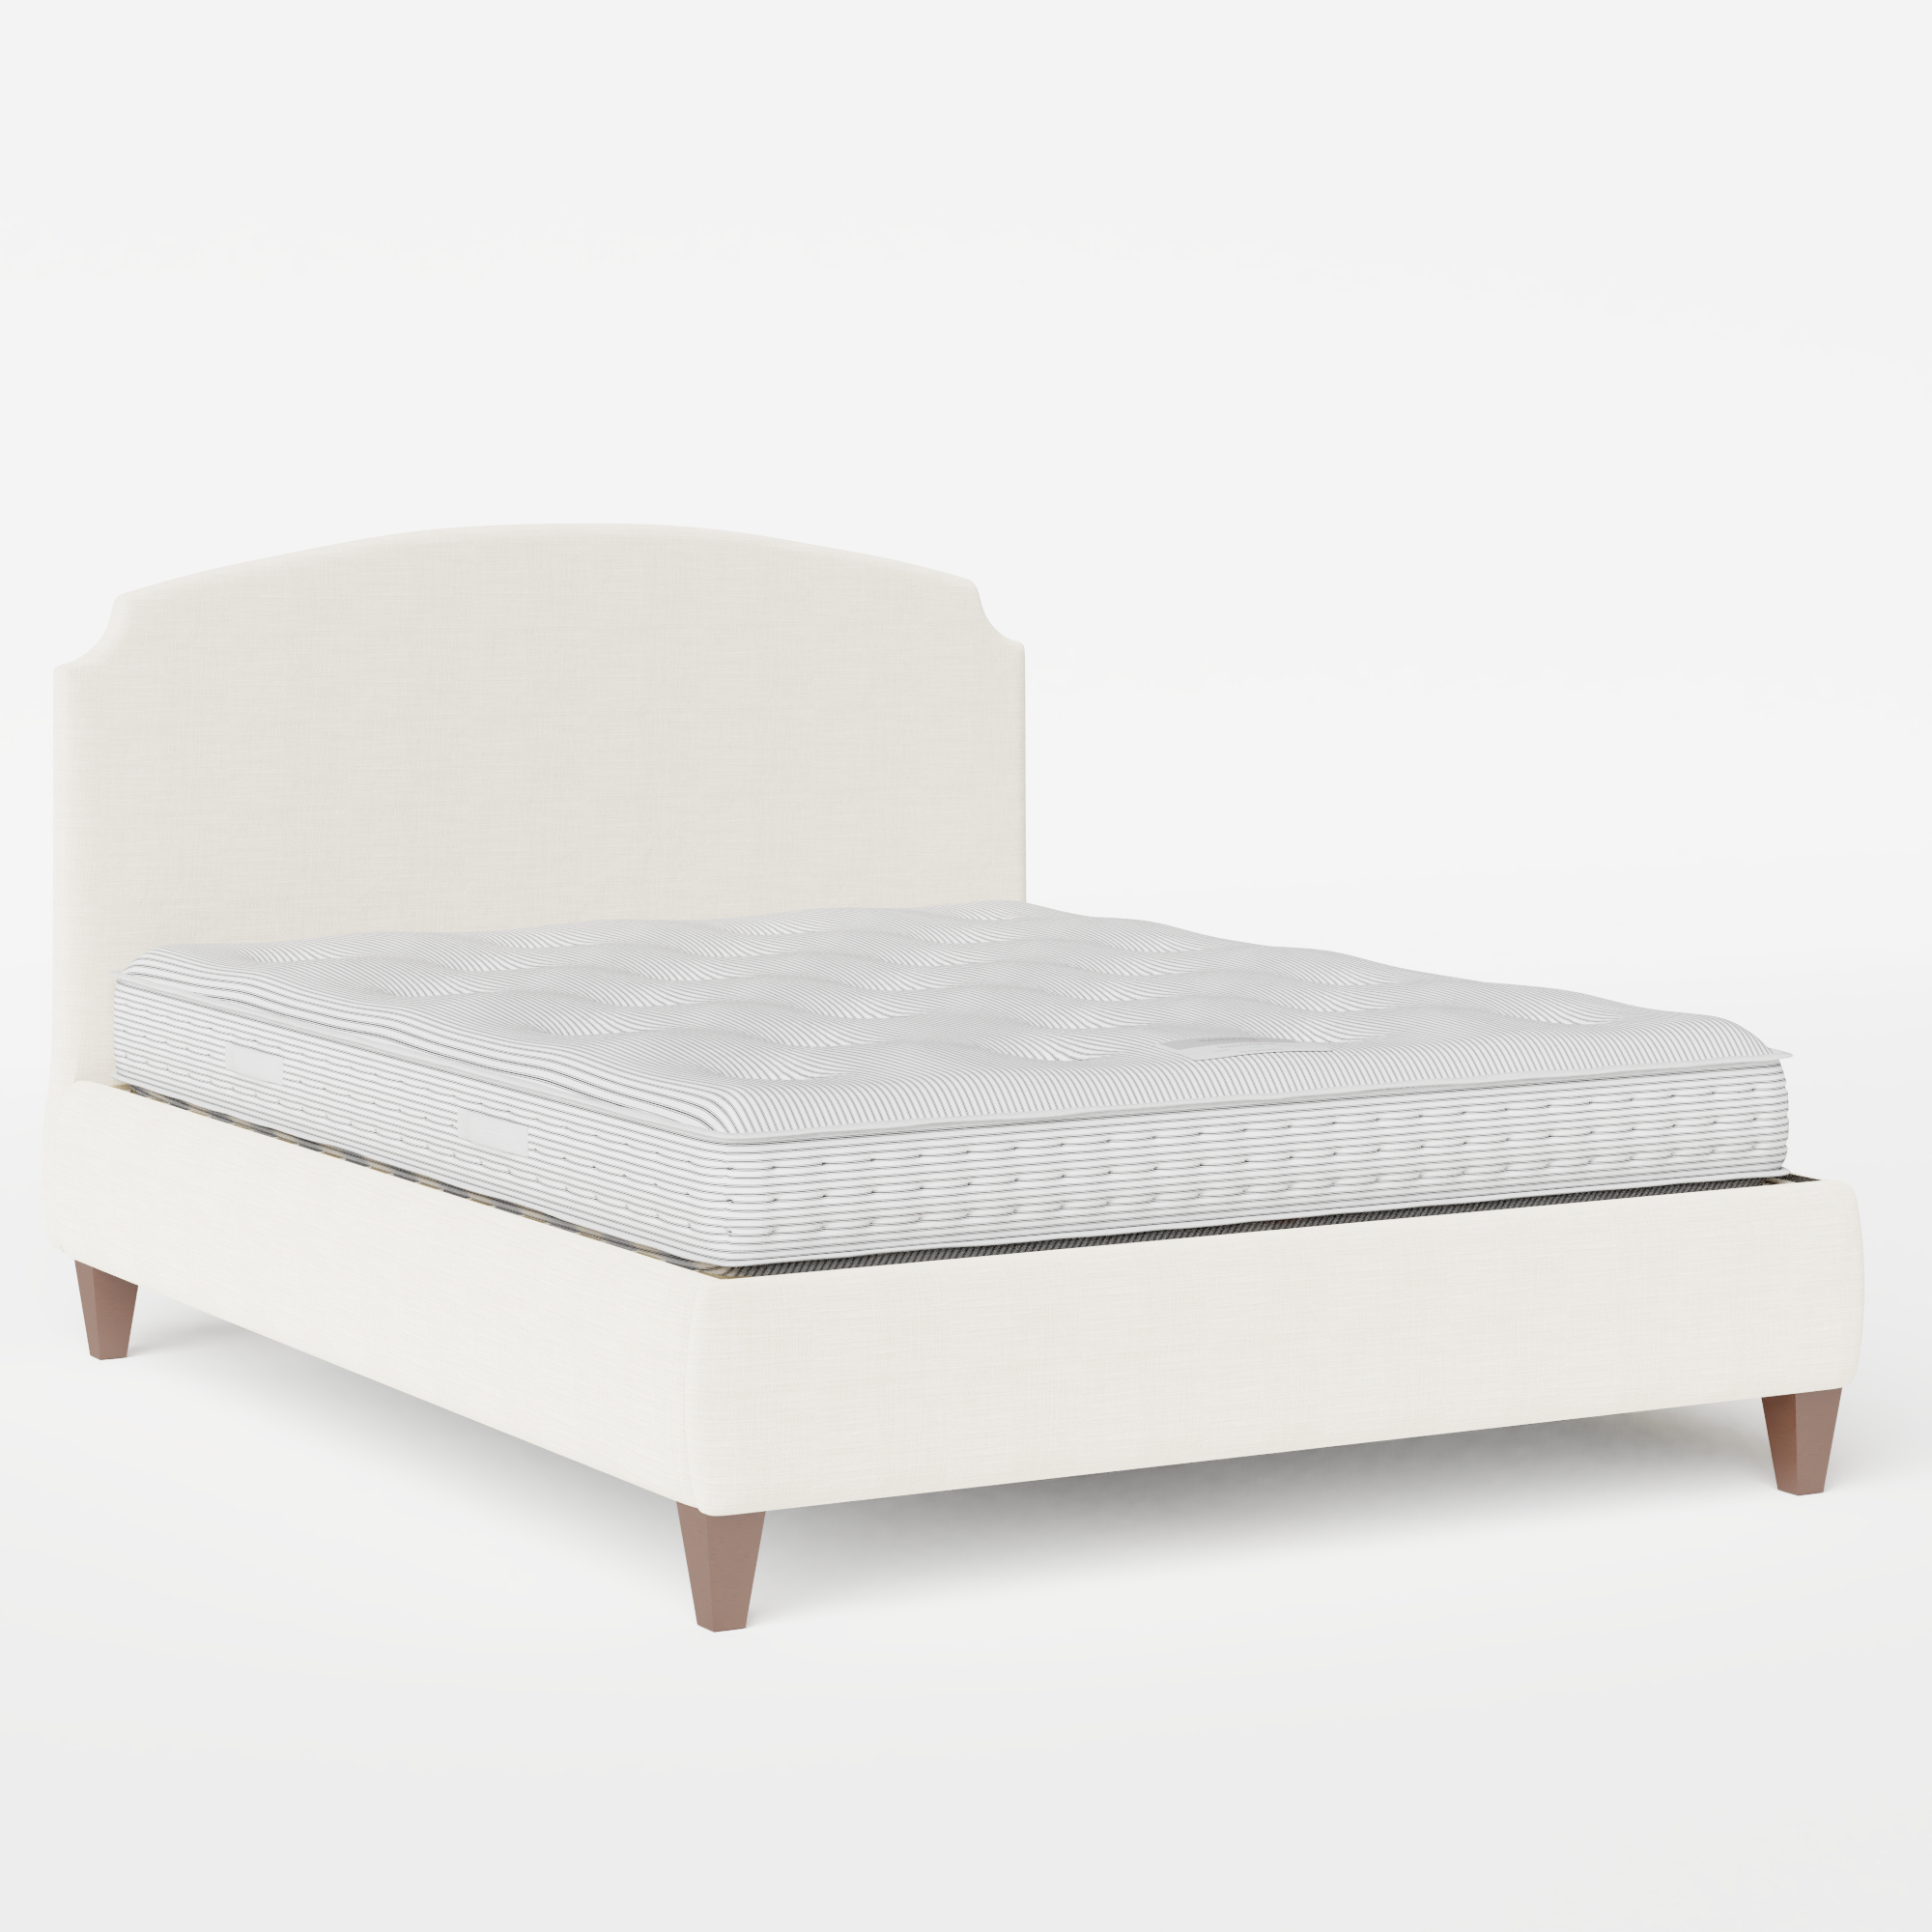 Lide upholstered bed in mist fabric